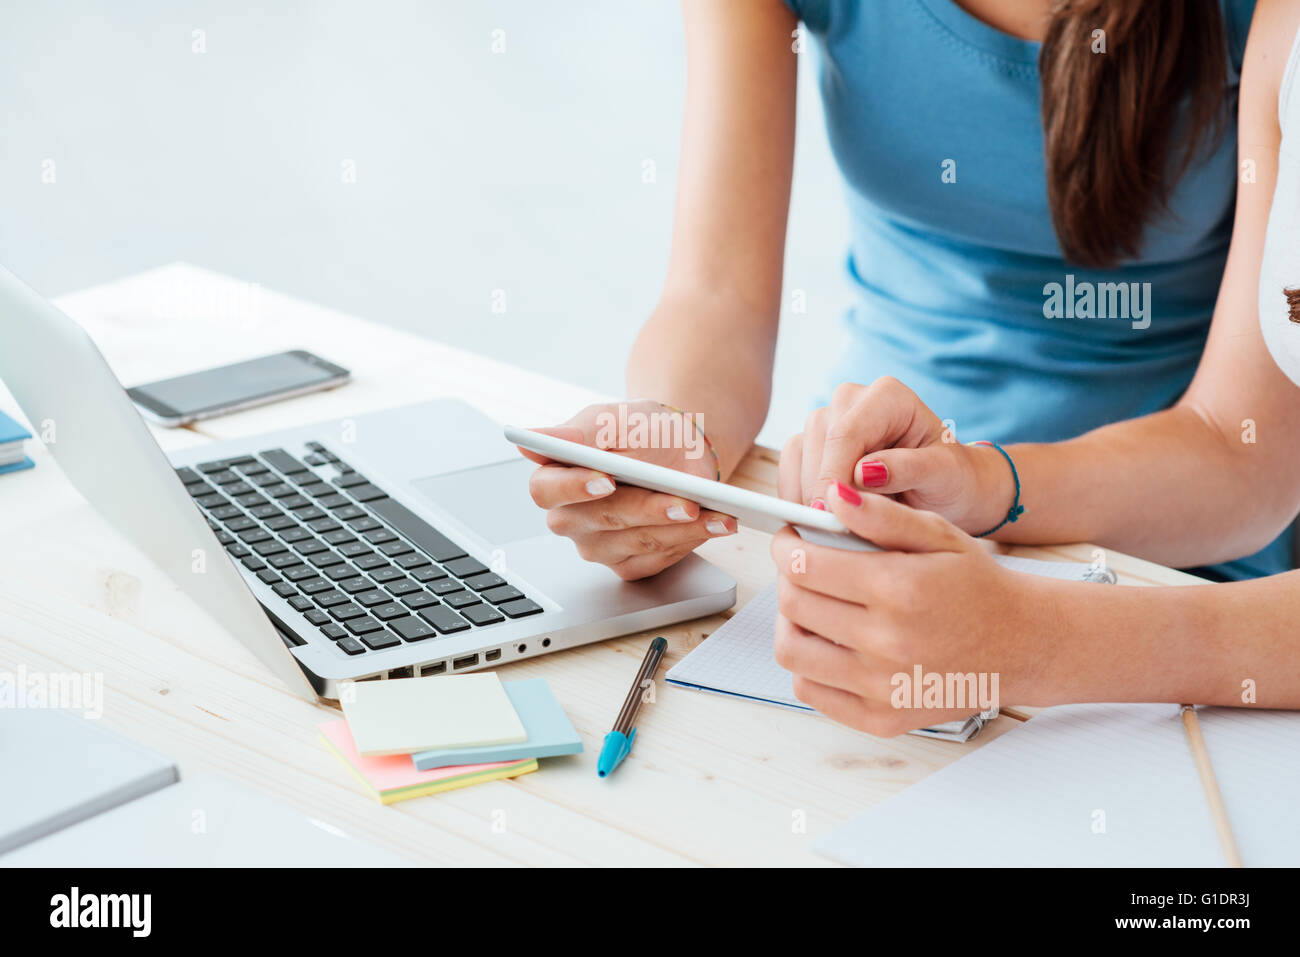 Teen girls sitting at desk and using a touch screen tablet, they are studying and using apps, hands close up Stock Photo